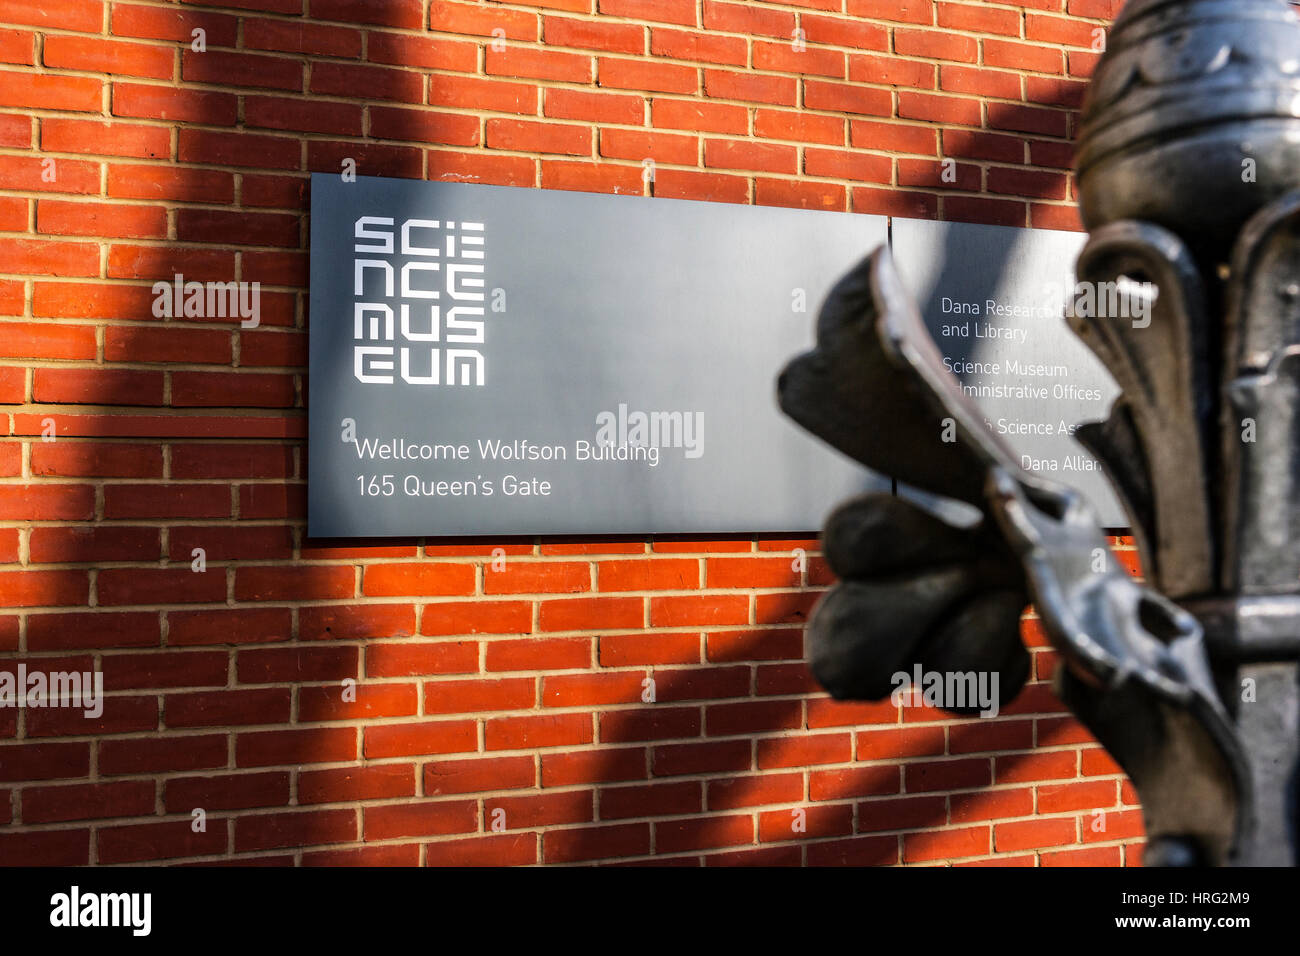 Science Museum sign, Wellcome Wolfson Building, London Stock Photo